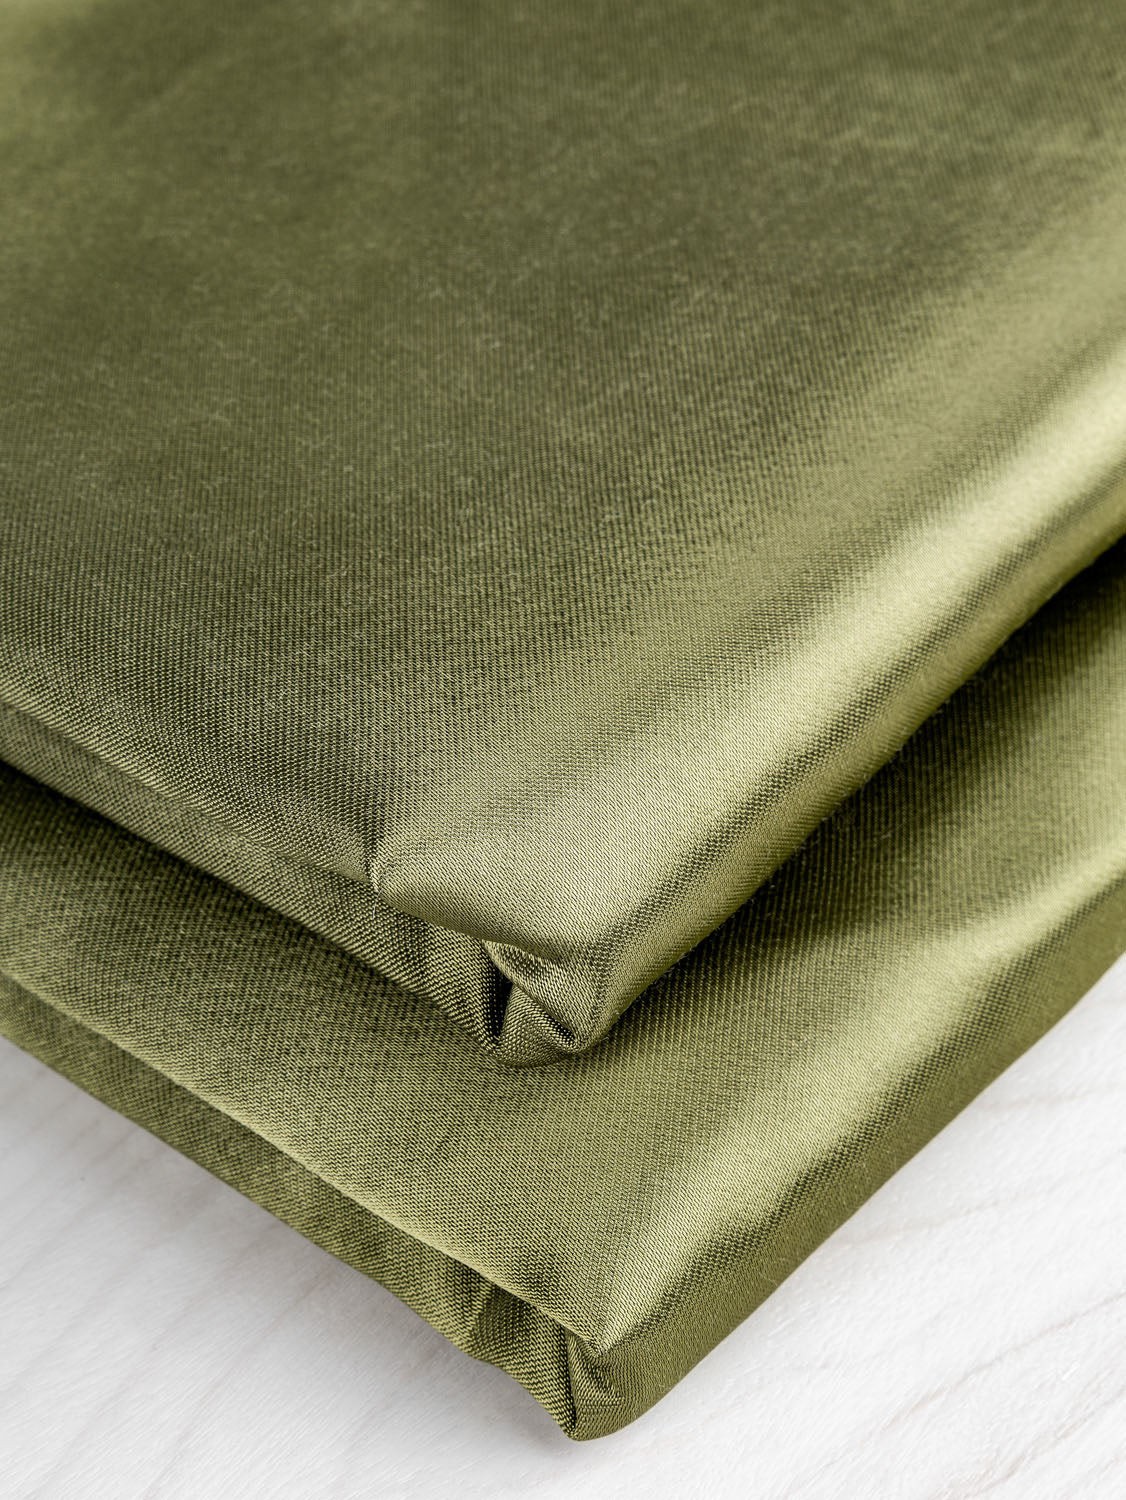 Wool Flannel Backed Satin Deadstock Lining - Forest Green | Core Fabrics